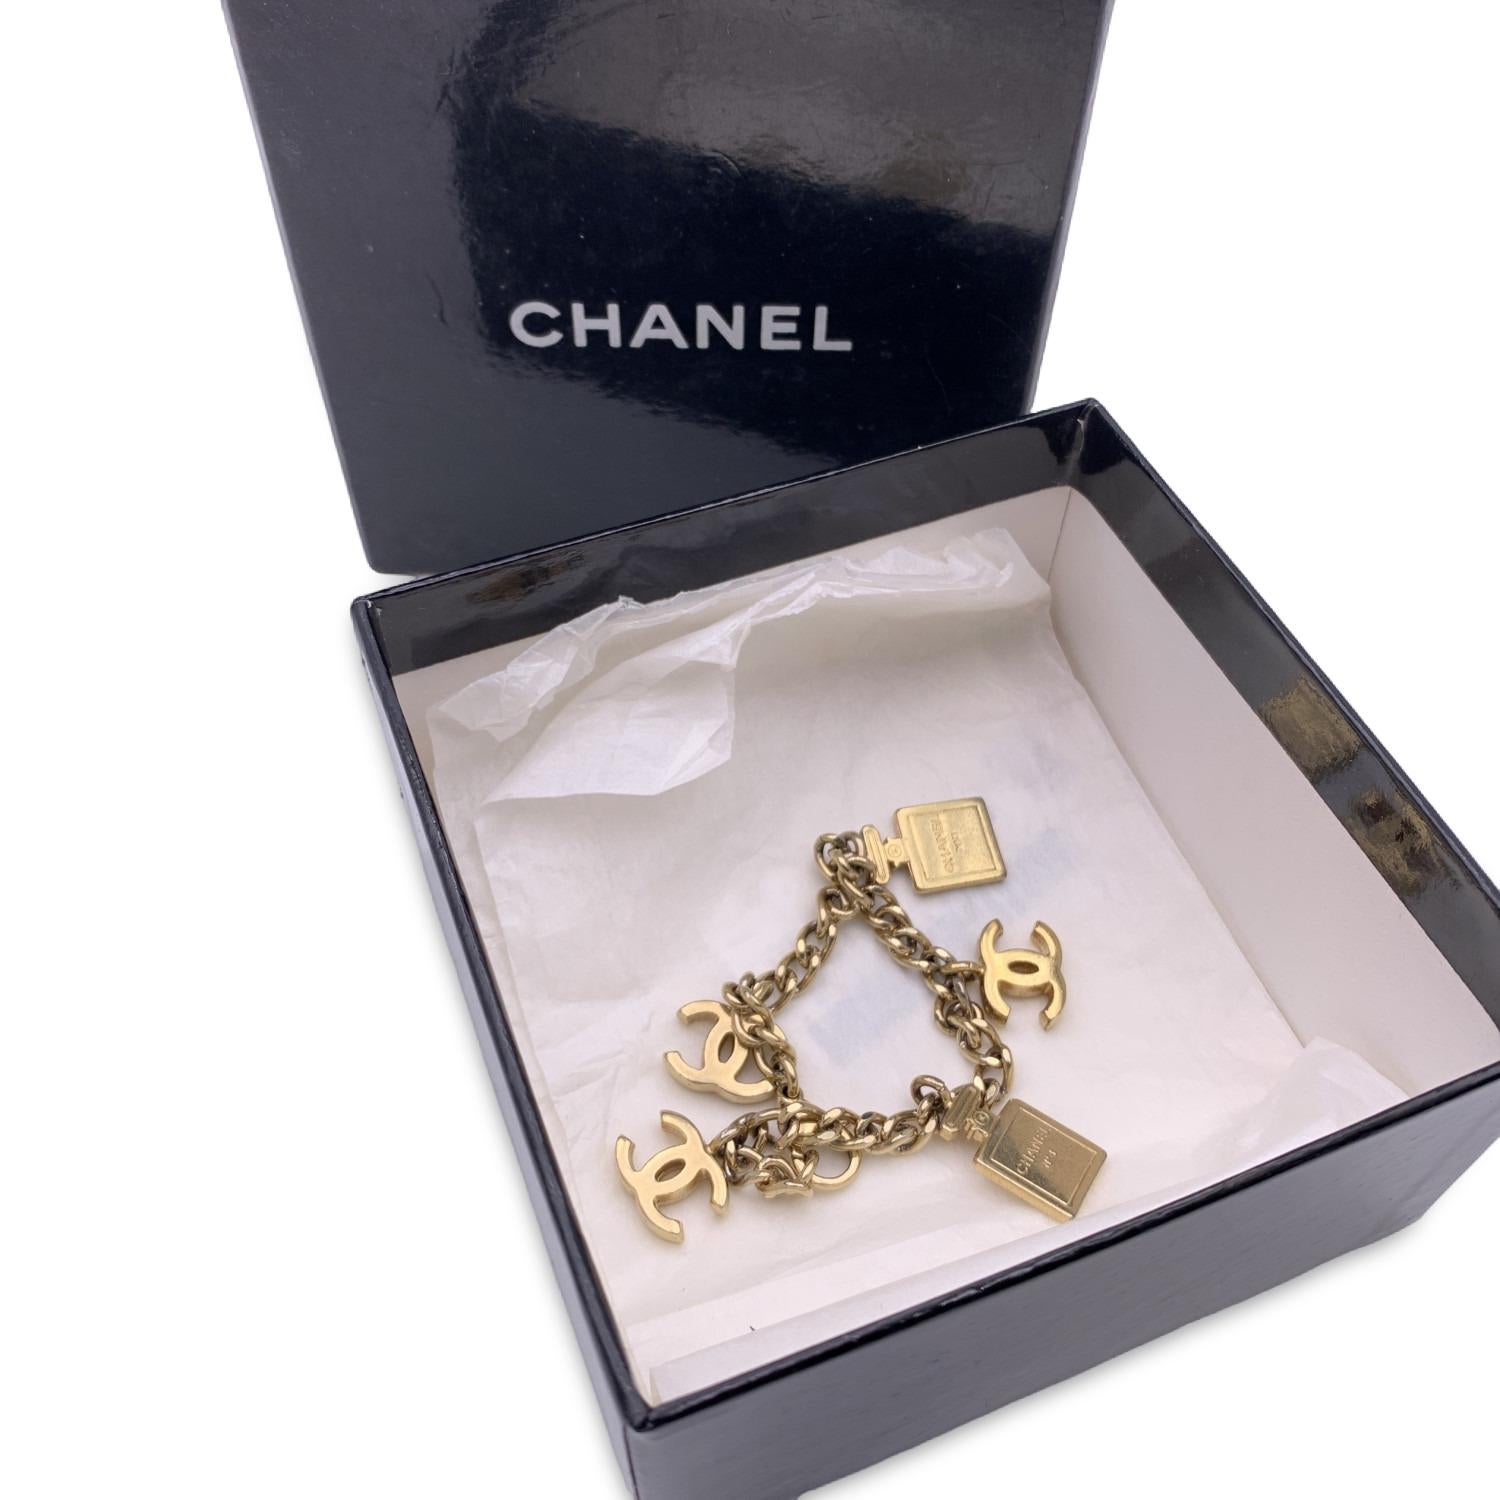 Lovely charms bracelet by CHANEL. Gold metal chain with 3 CC logo shaped pendant and 3 perfum bottles charms. Lobster closure. 'CHANEL 02 CC A - Made in Italy' oval tab at the end of the bracelet. Total length: 7 inches - 17.8 cm

Condition

A -